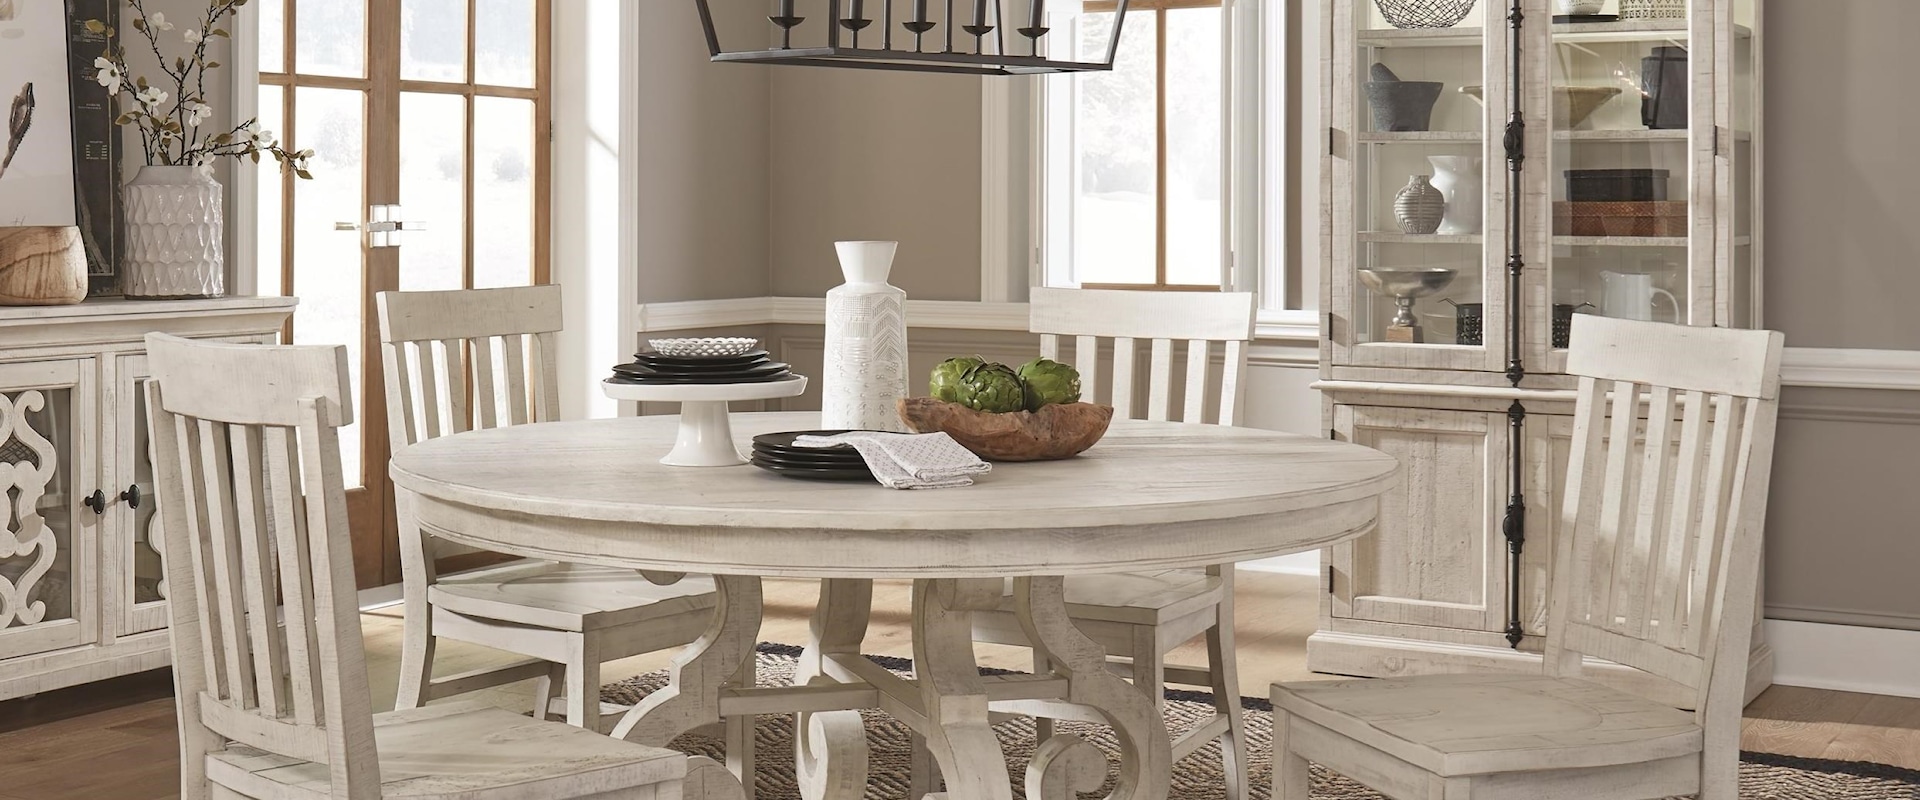 5-Piece Farmhouse Dining Set with Round Table